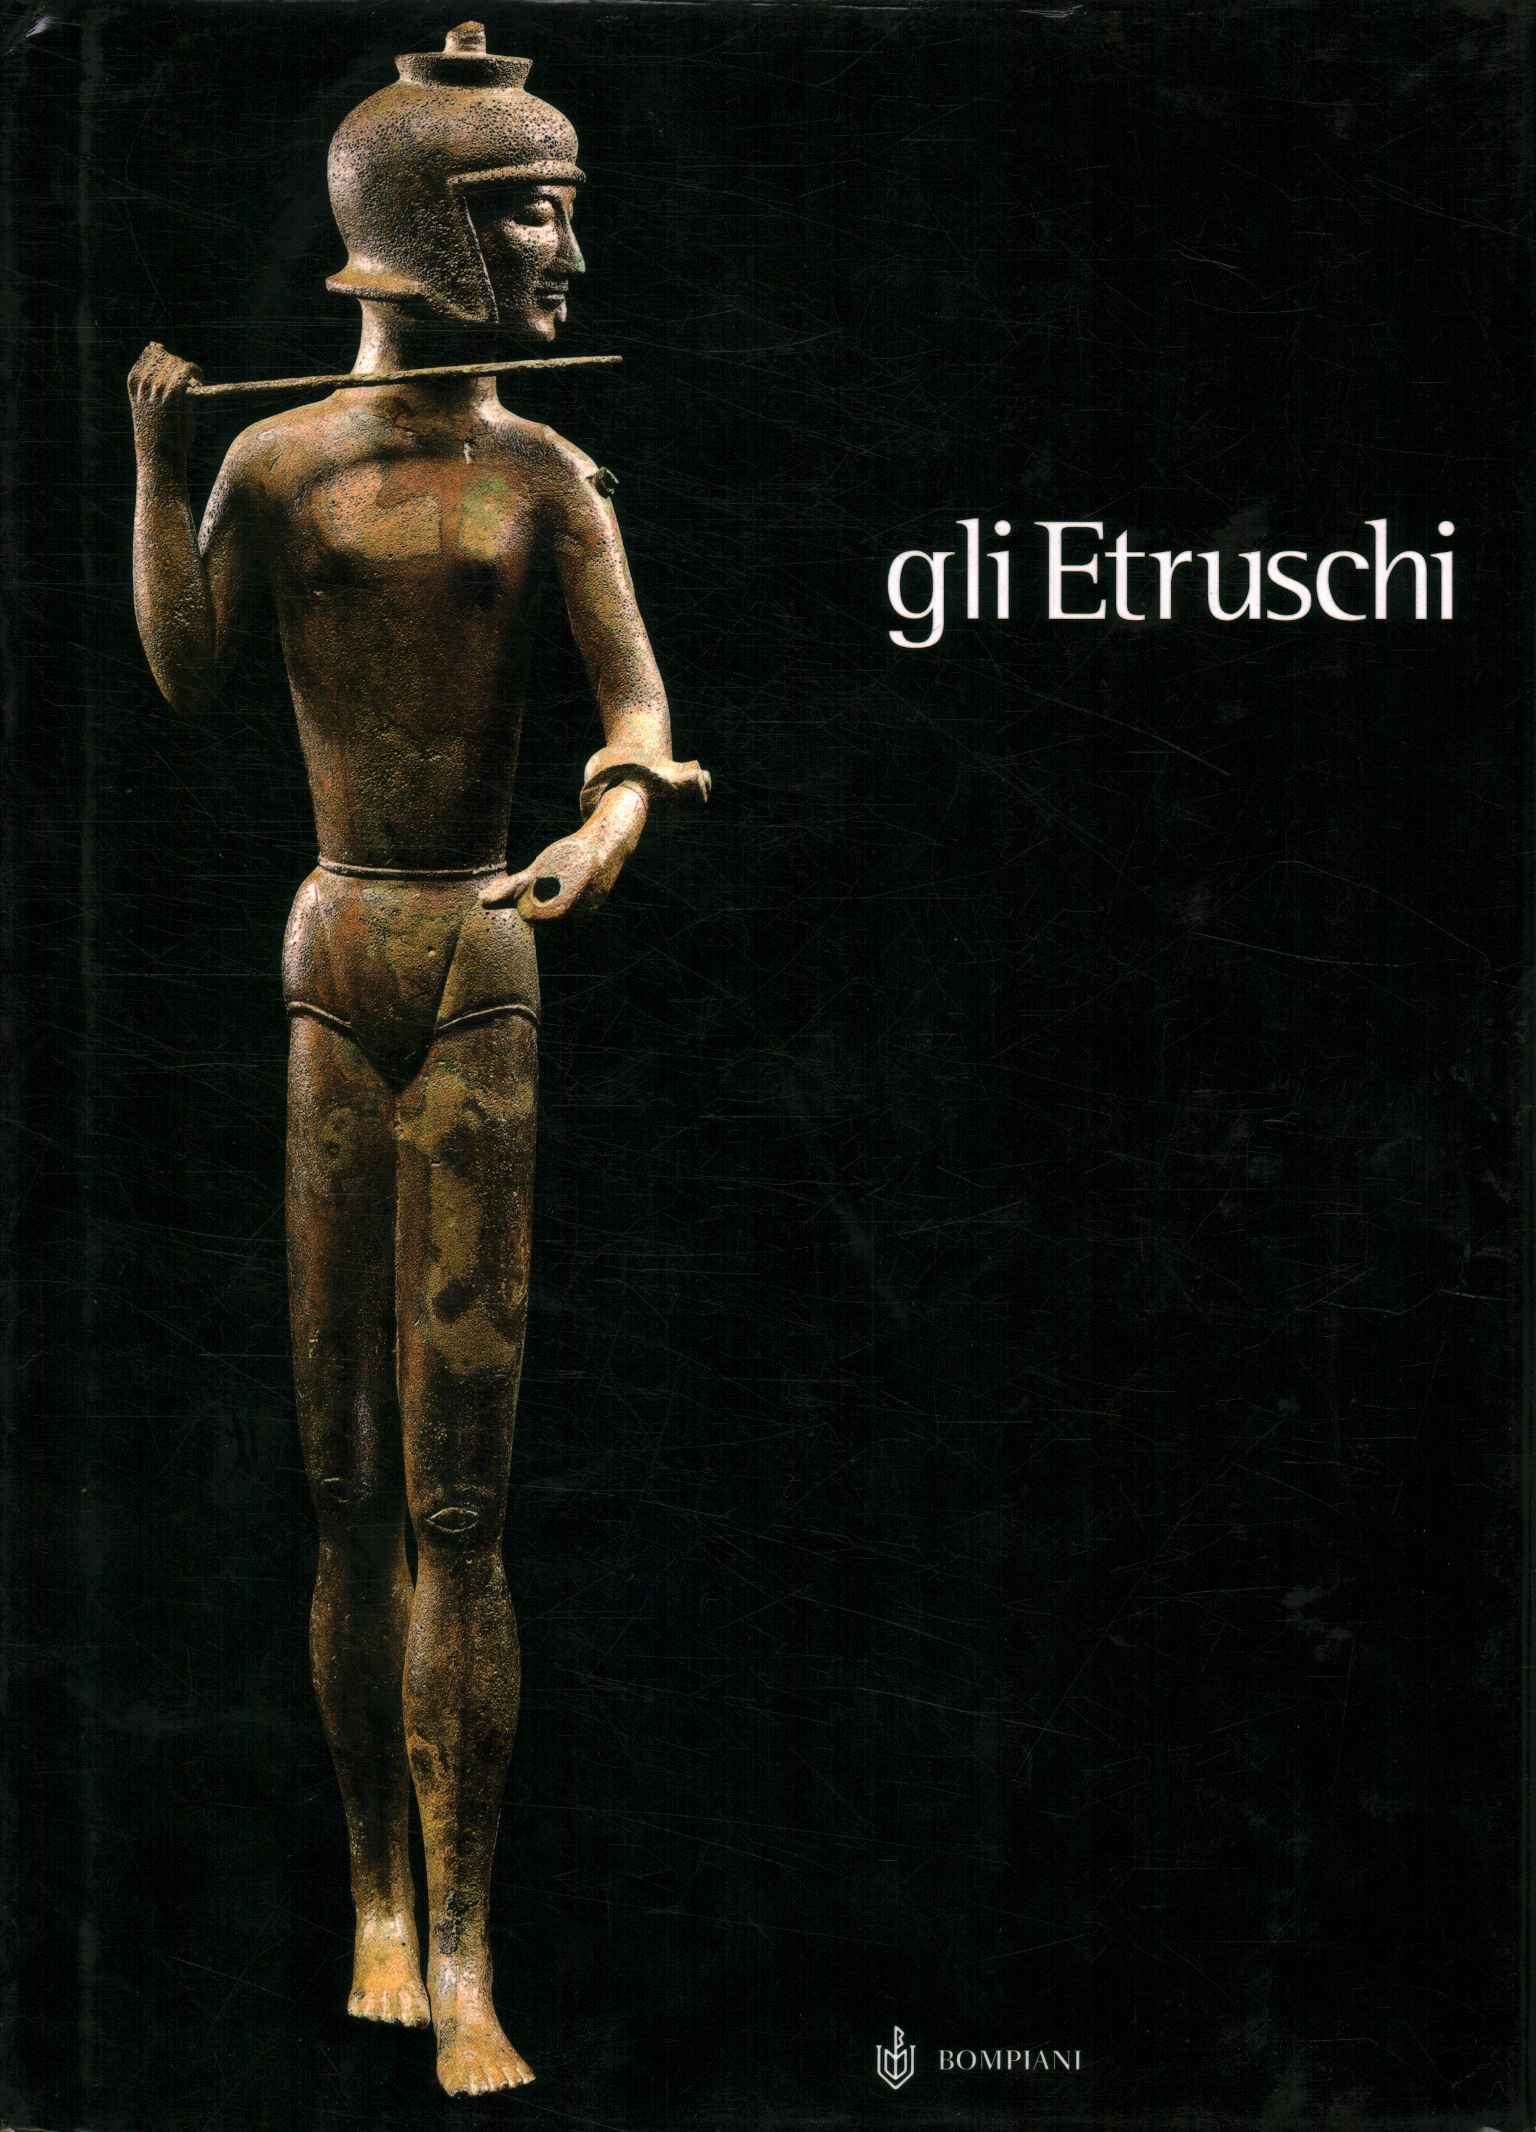 the Etruscans